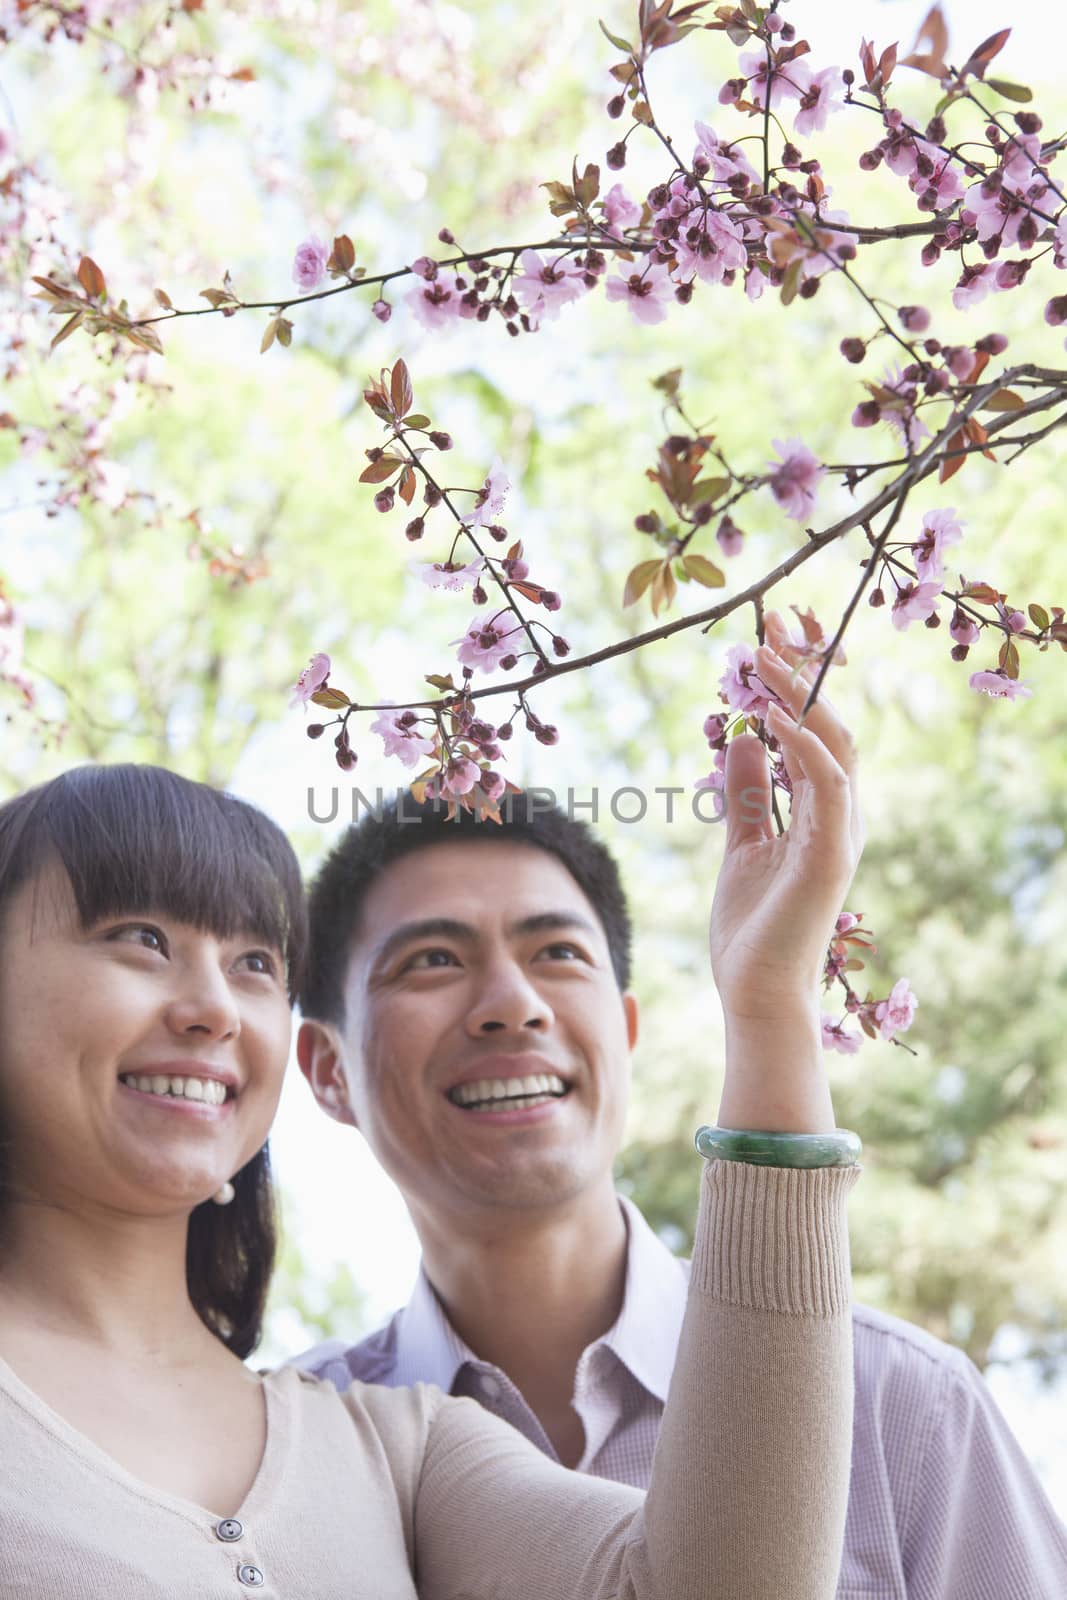 Smiling couple looking up and touching a branch with cherry blossoms, outside in a park in the springtime by XiXinXing